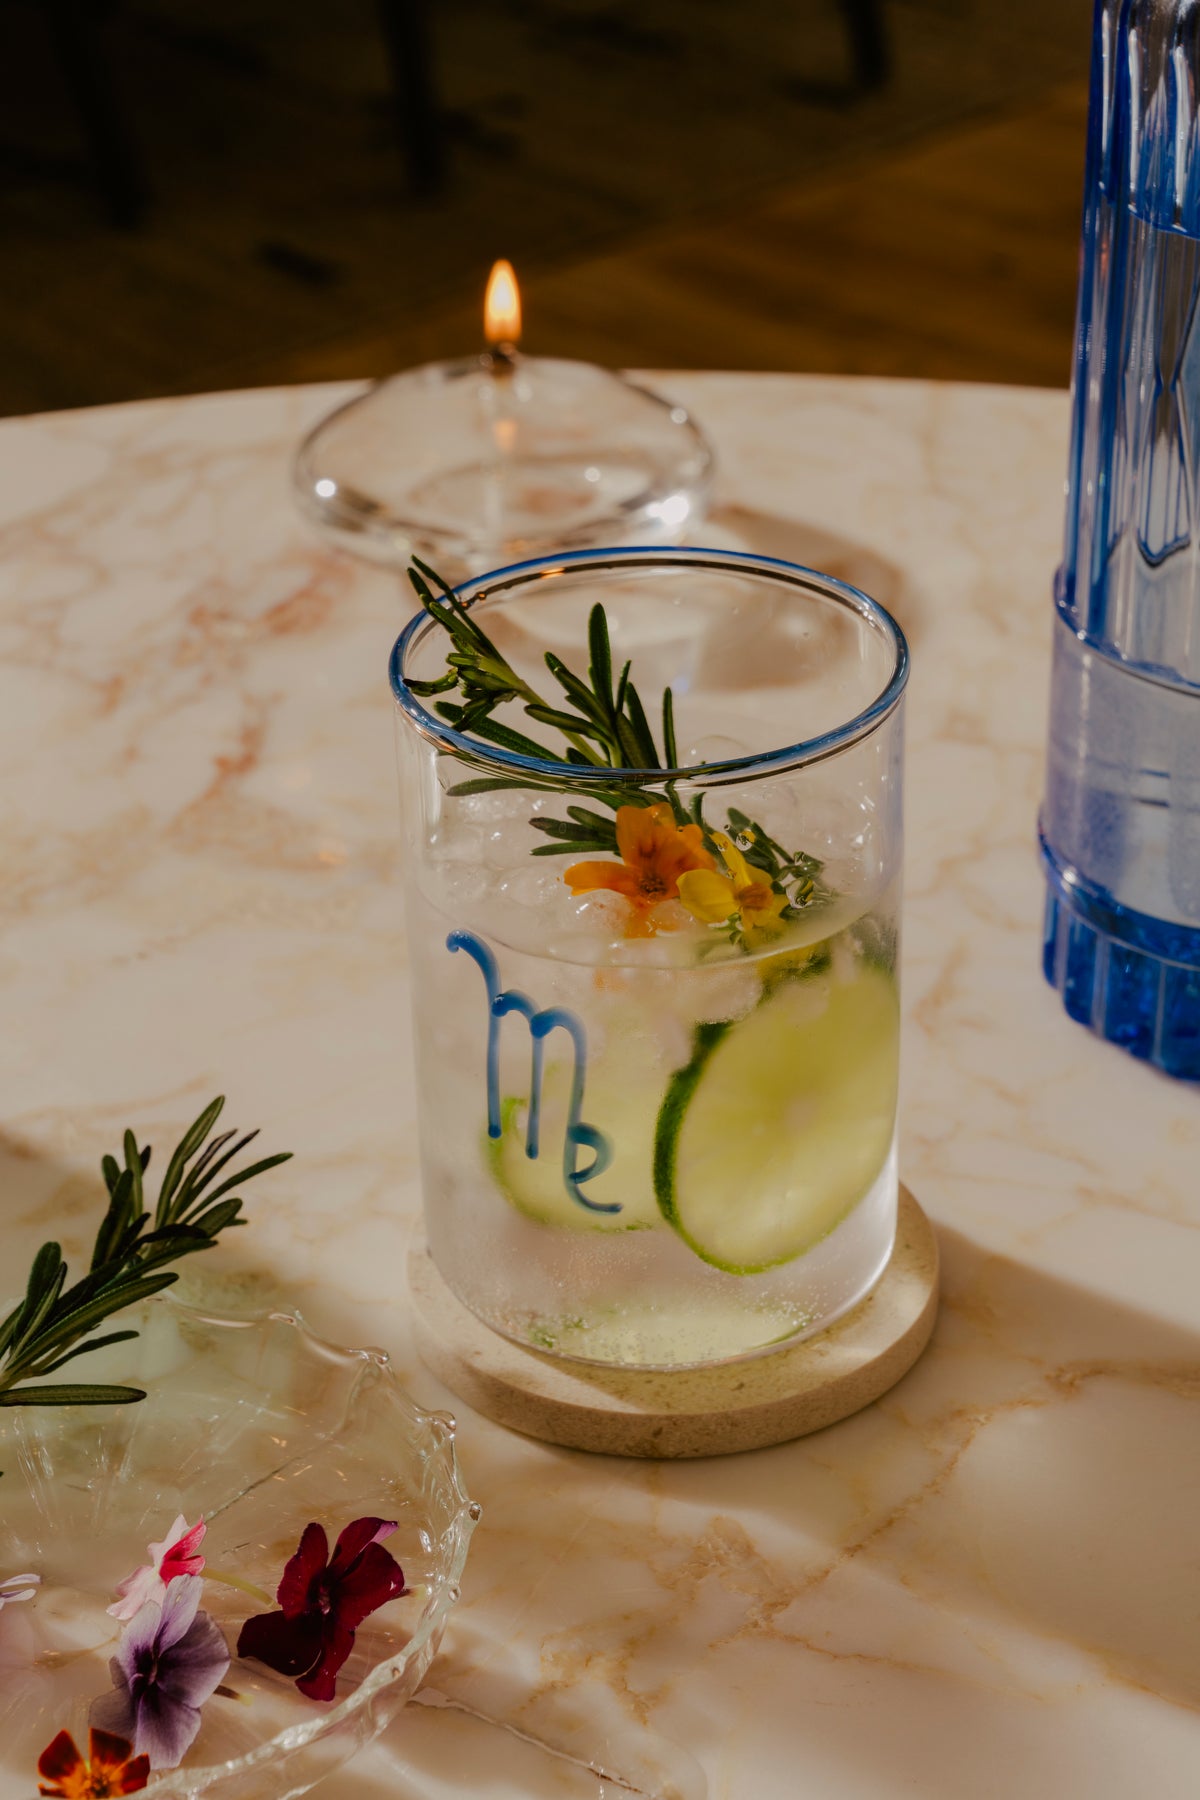 A classic and refreshing gin and tonic, served in a transparent hand-blown glass with cobalt with a blue rim and the blue astrological symbol for Virgo. The beverage is infused with green cucumber slices and a sprig of rosemary, suggesting a herbal and fresh flavor profile. A delicate edible flower floats on the surface, adding an elegant touch. These modern cocktail glasses can immediately elevate a table. Plus, since they’re so affordable, you can gift your friend a whole set of them.